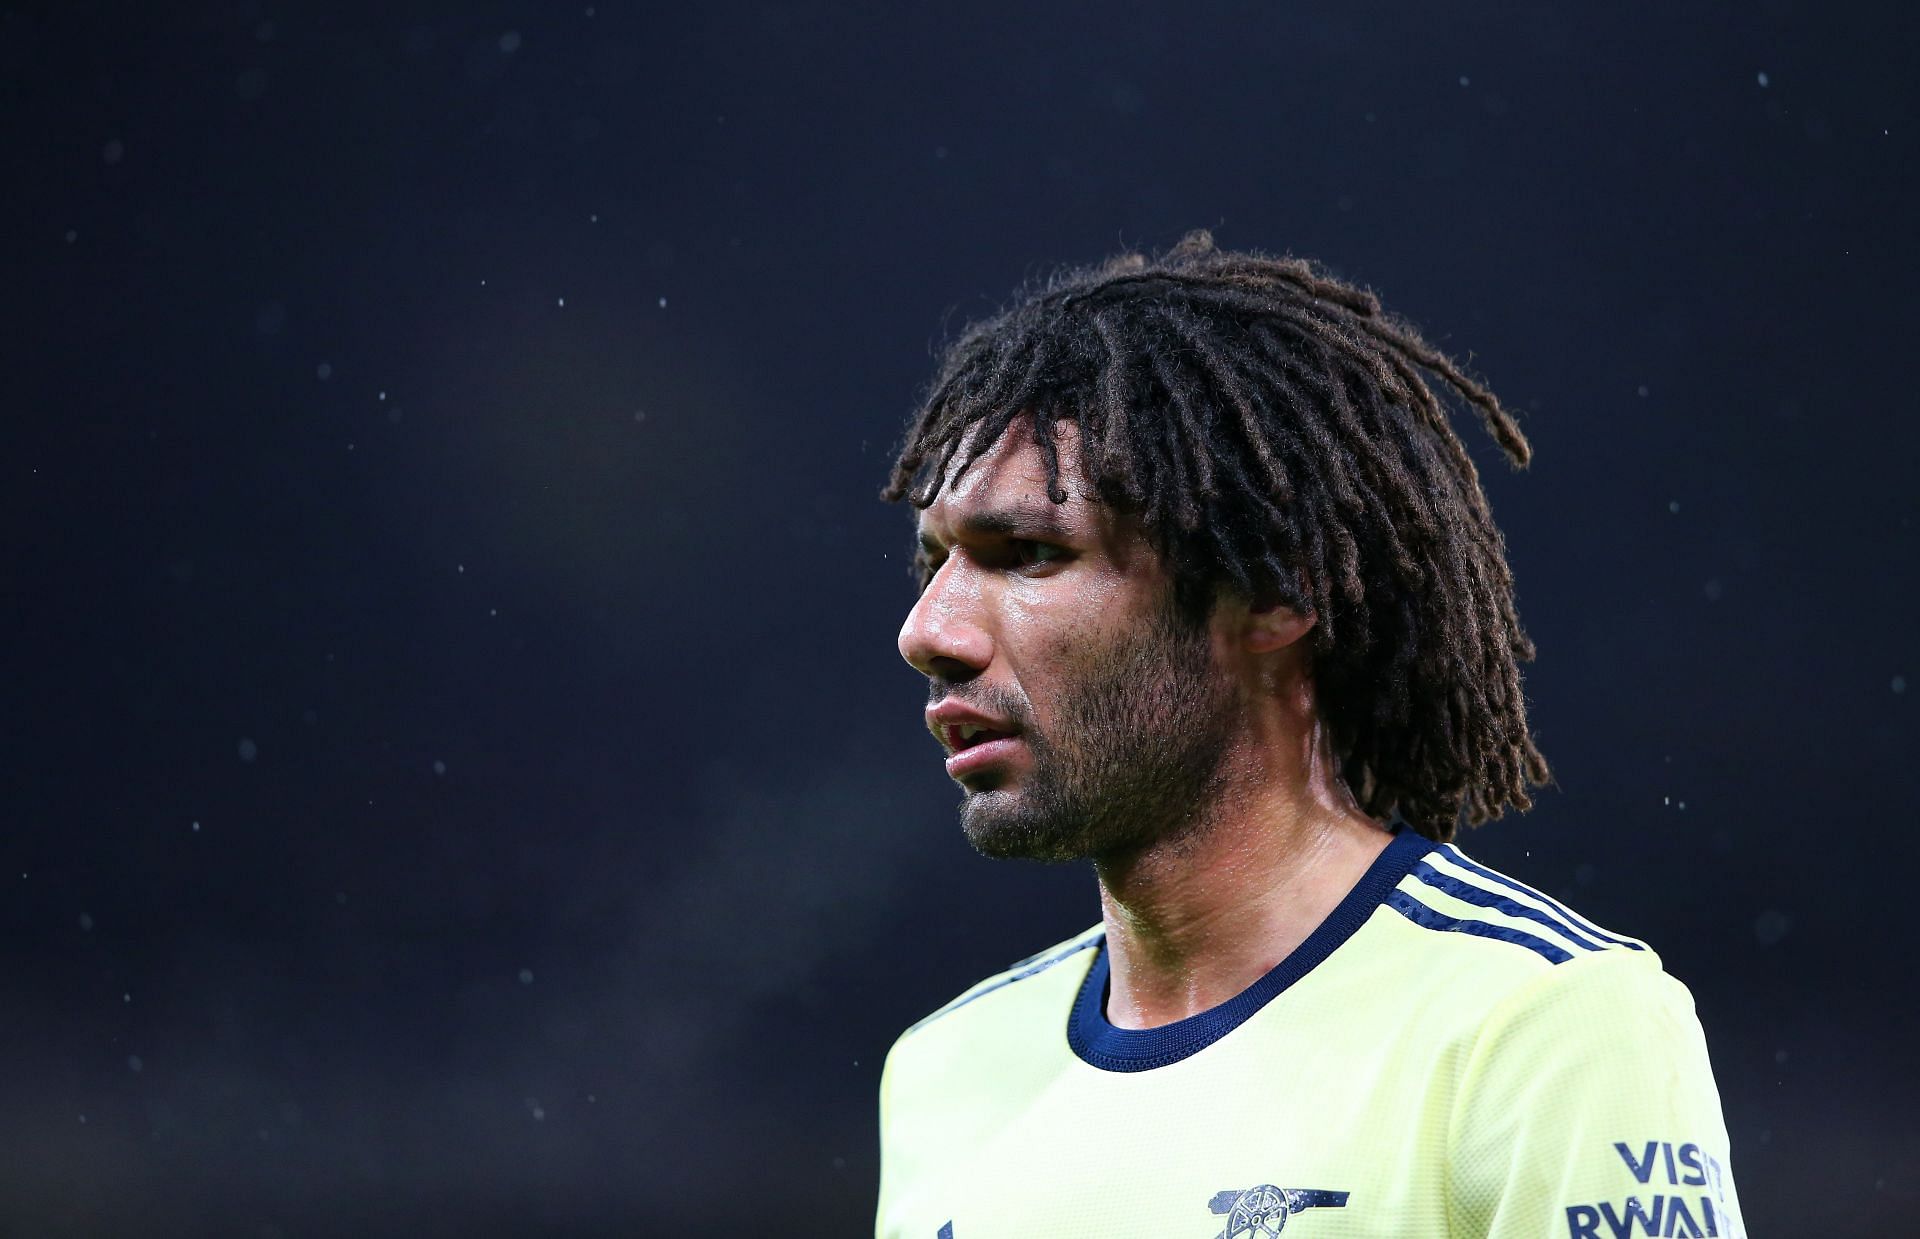 Mohamed Elneny has featured in 10 games across all competitions for Arsenal this season